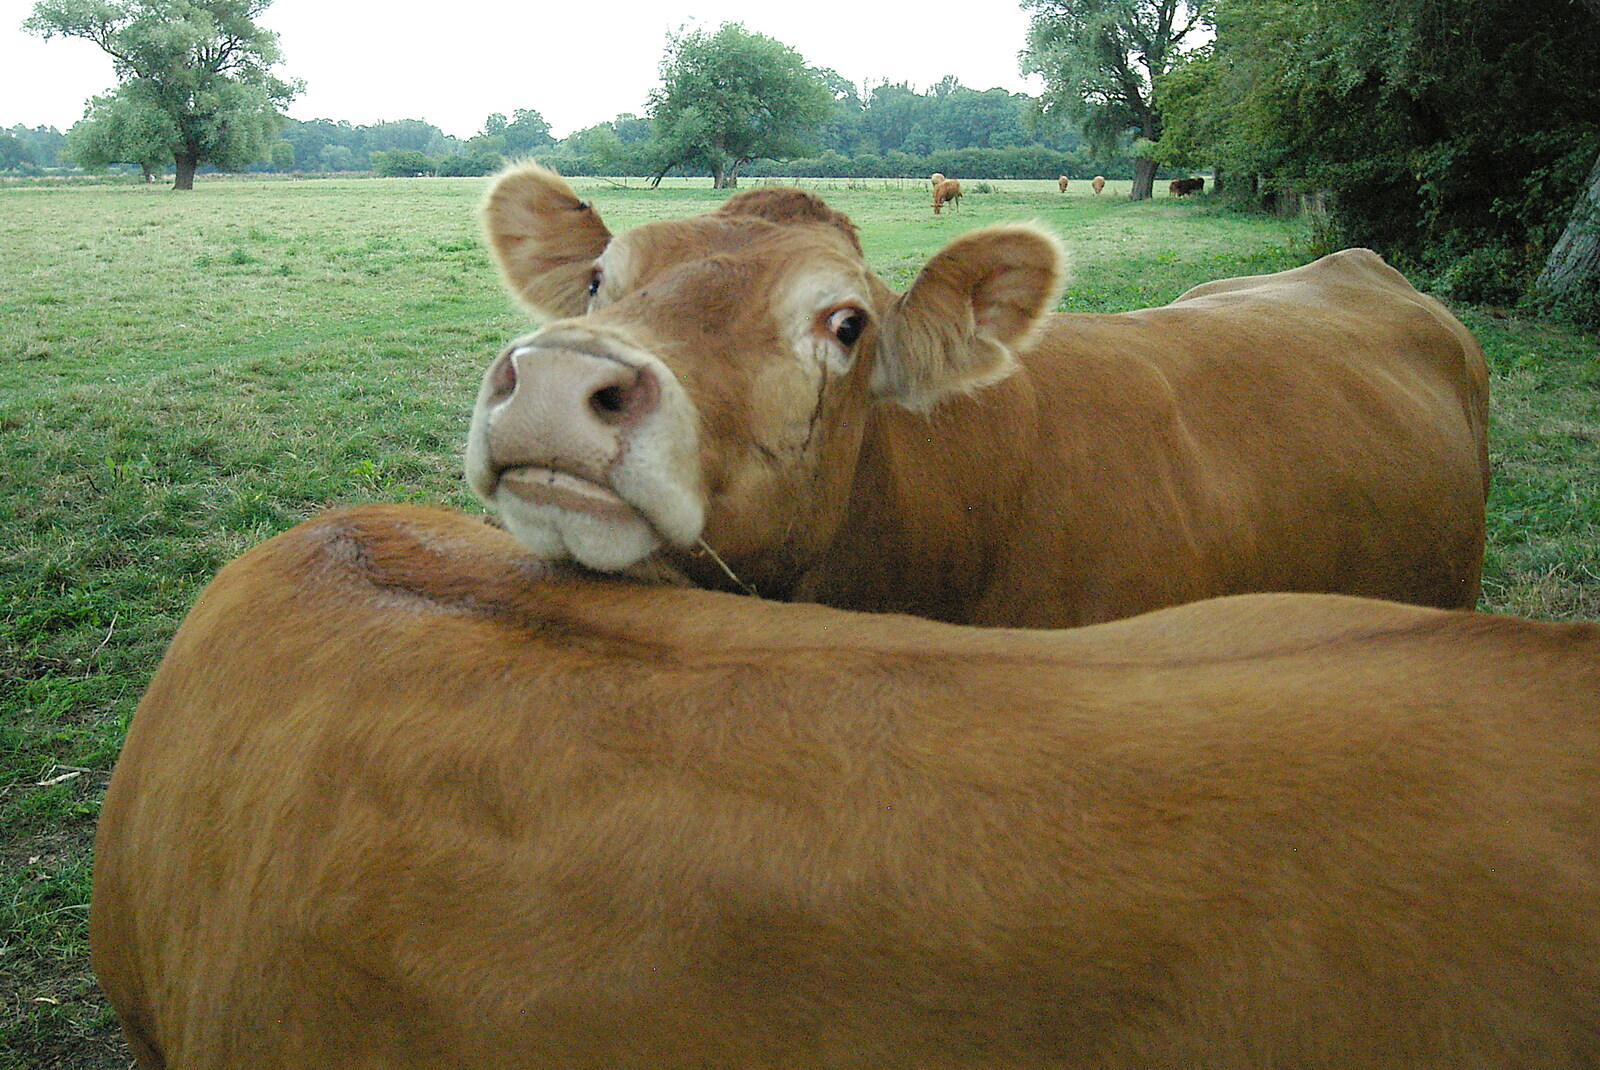 A couple of cute cows in a nearby field from Qualcomm goes Punting on the Cam, Grantchester Meadows, Cambridge - 18th August 2005